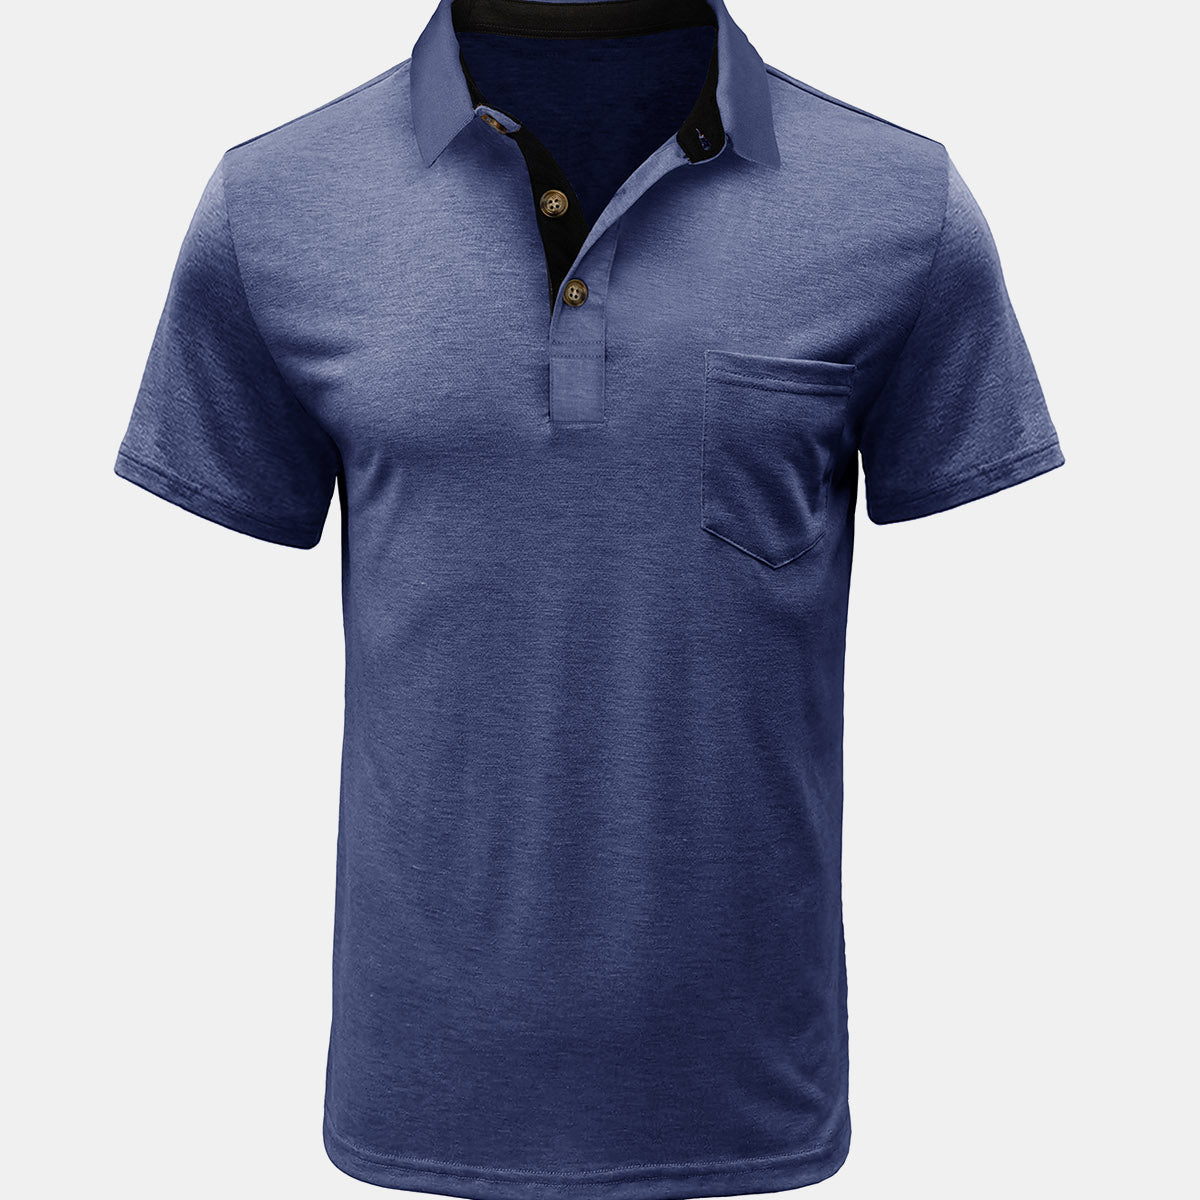 Men's Summer Casual Breathable Pocket Solid Color Short Sleeve Polo Shirt